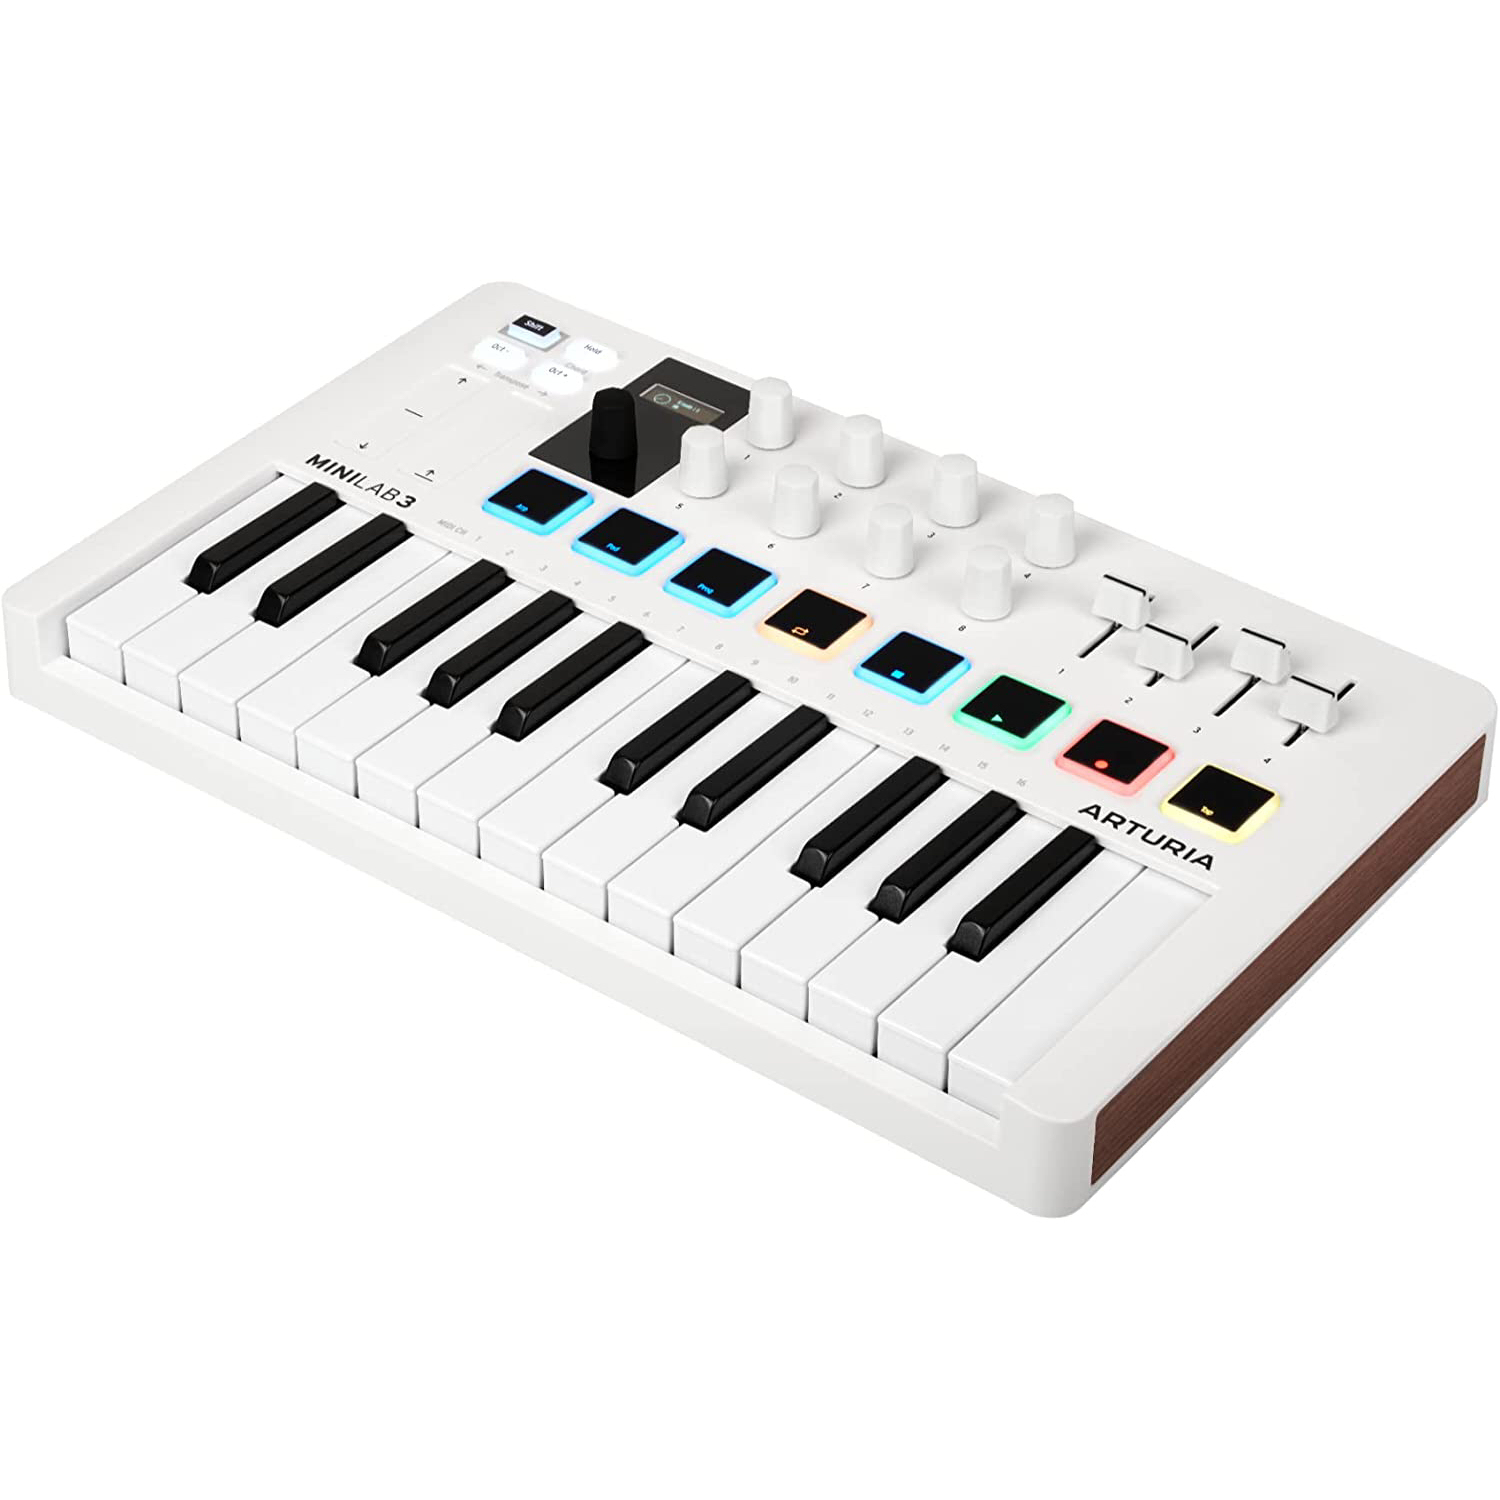 Arturia MiniLab 3 Review: A Hybrid MIDI Keyboard Controller for Music Producers